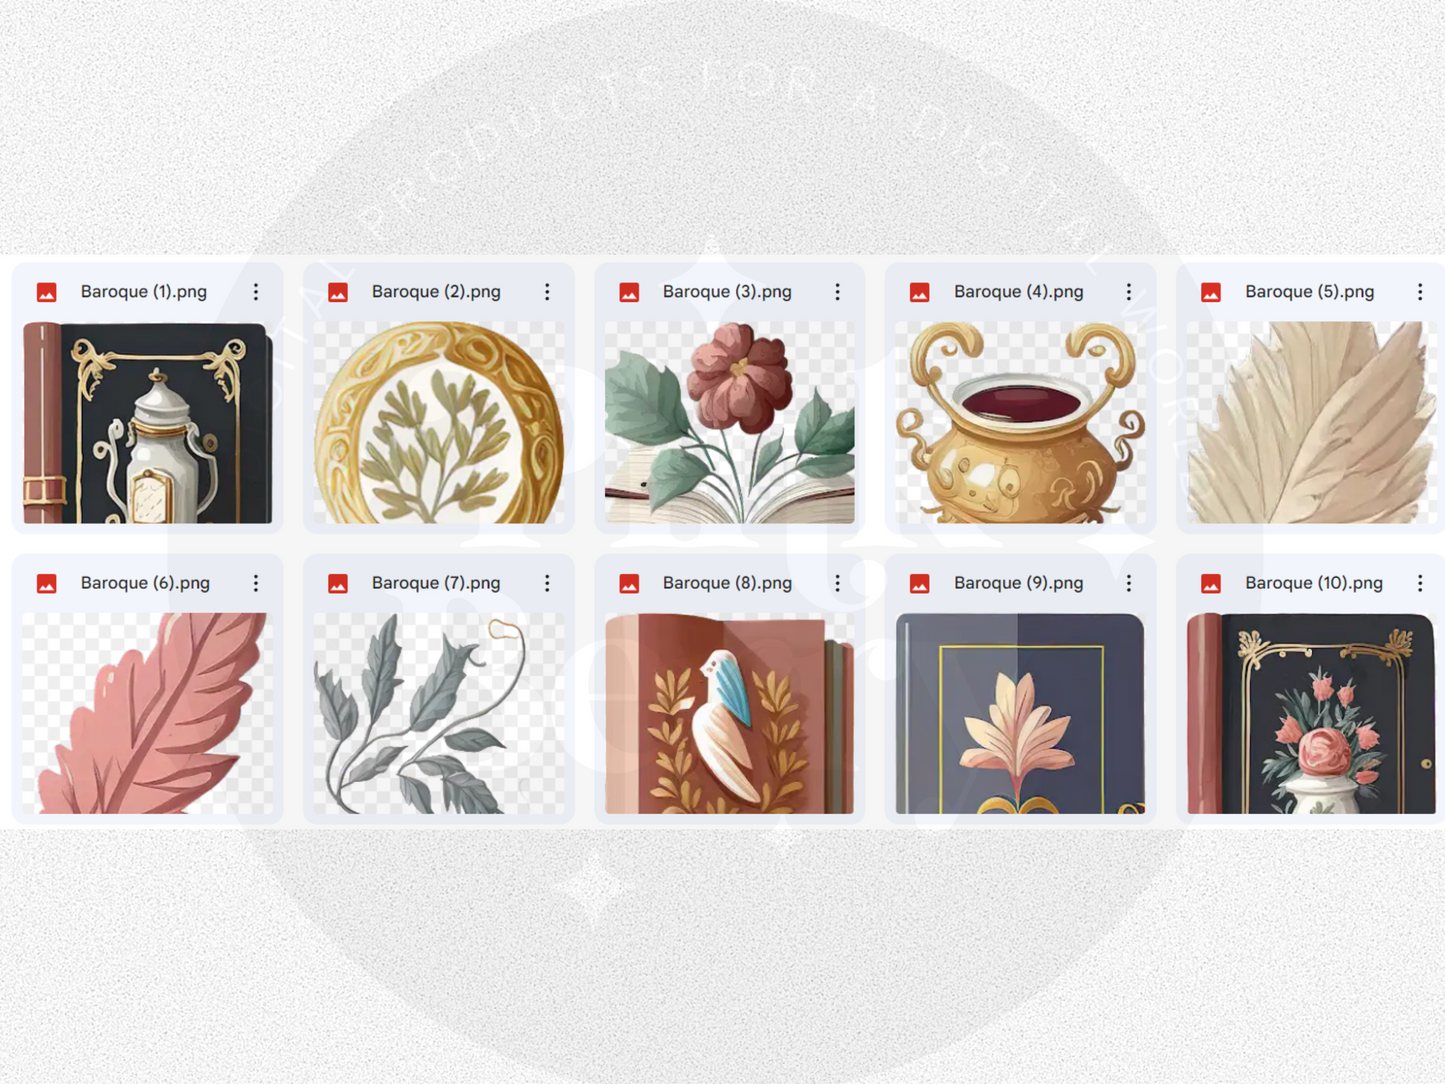 Baroque Library Digital Pre-Cropped Digital Planner Stickers For Goodnotes- 49 Digital Stickers